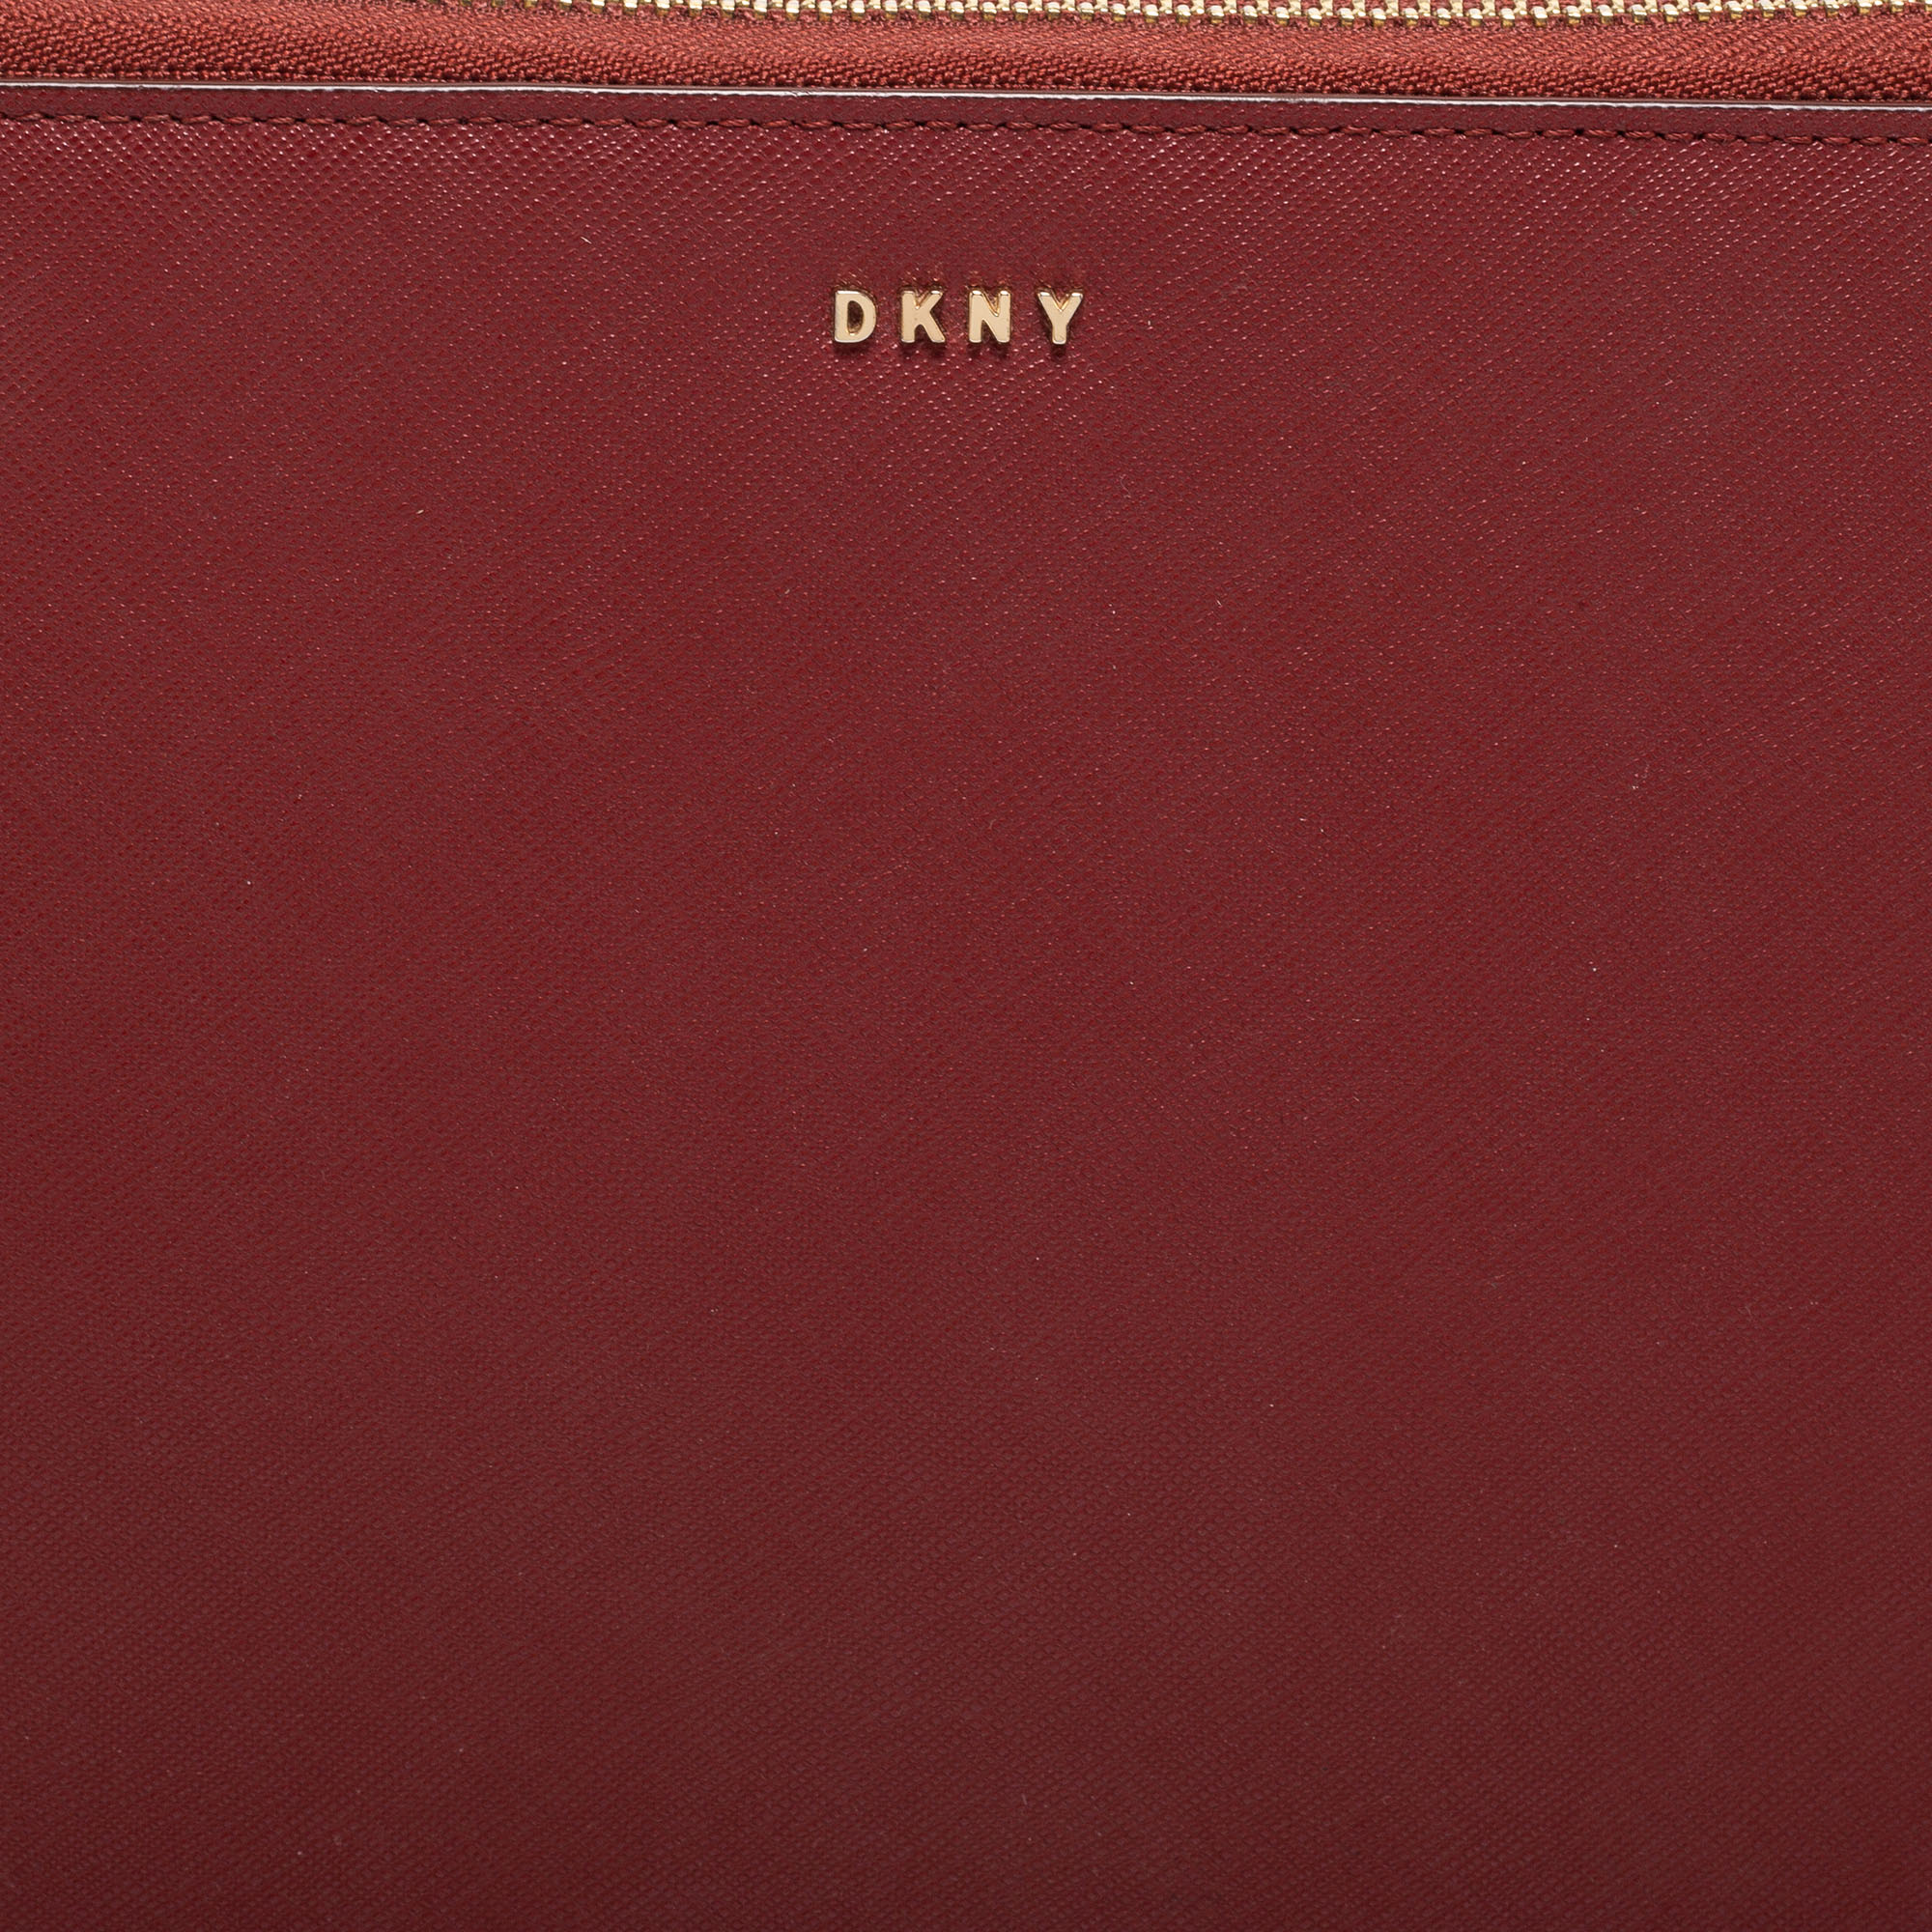 DKNY Red Leather Large Bryant Zip Around Clutch